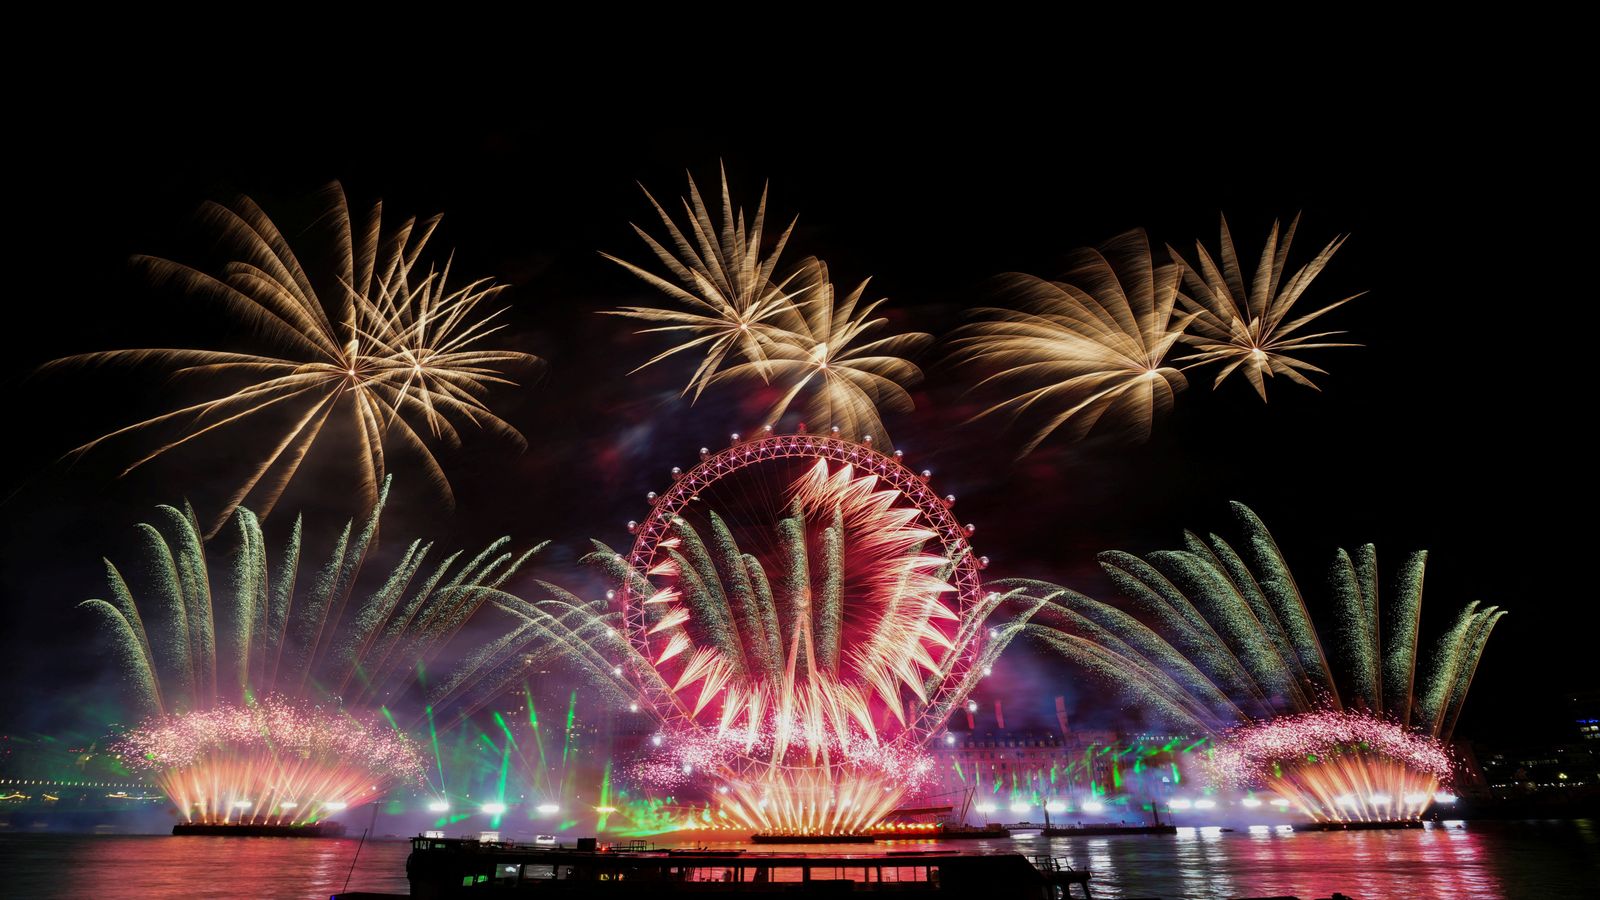 London's New Year fireworks display includes tribute to the Queen and show of support for Ukraine